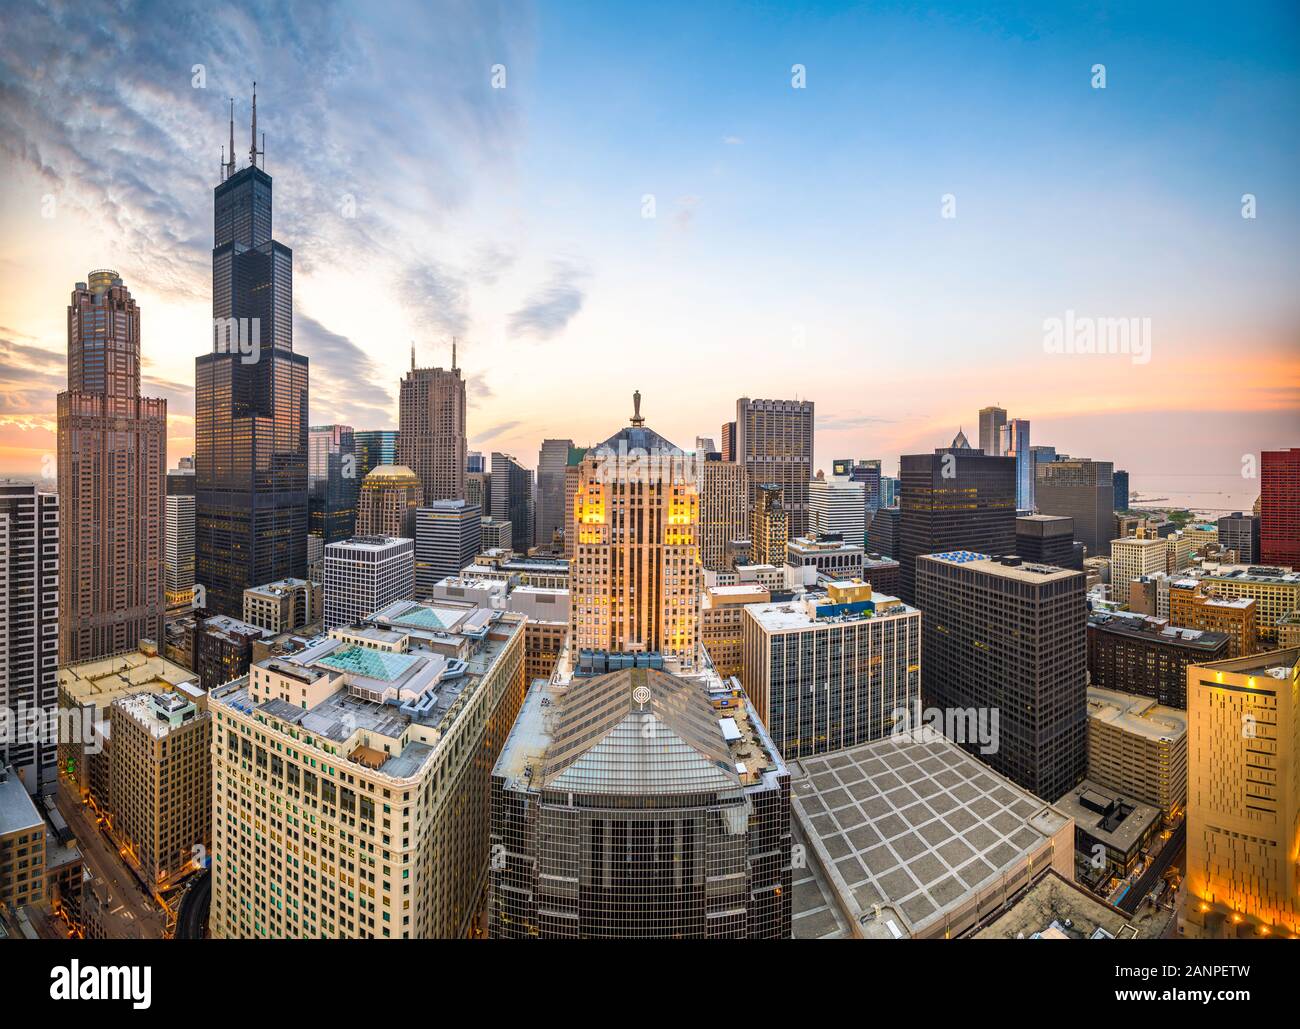 Chicago, IL, USA downtown cityscape at dusk. Stock Photo